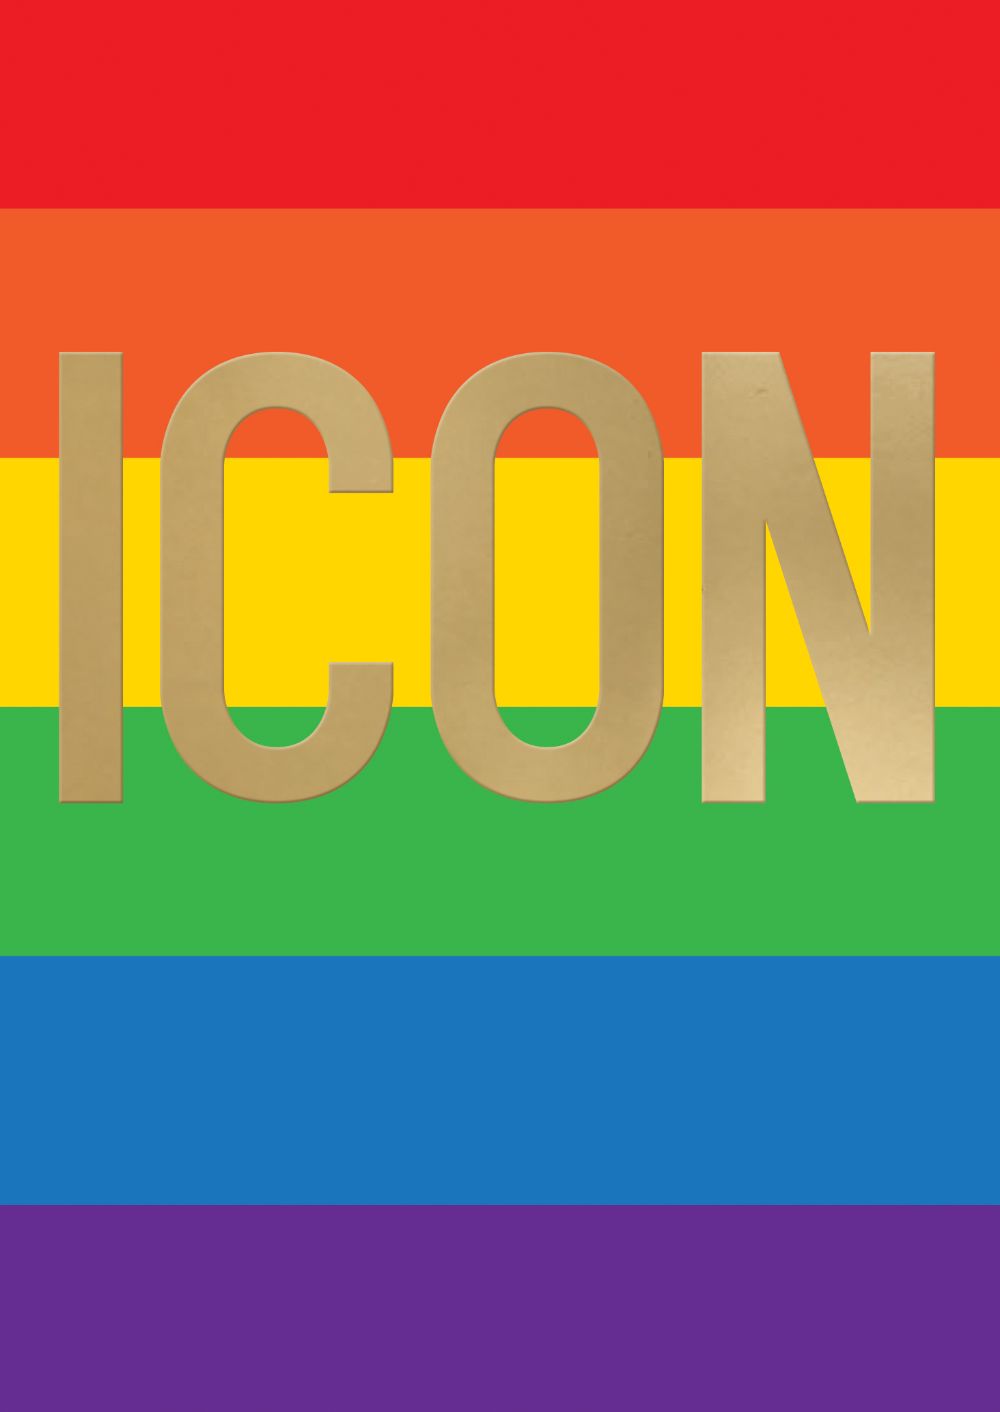 Icon Say It With Pride Greeting Card